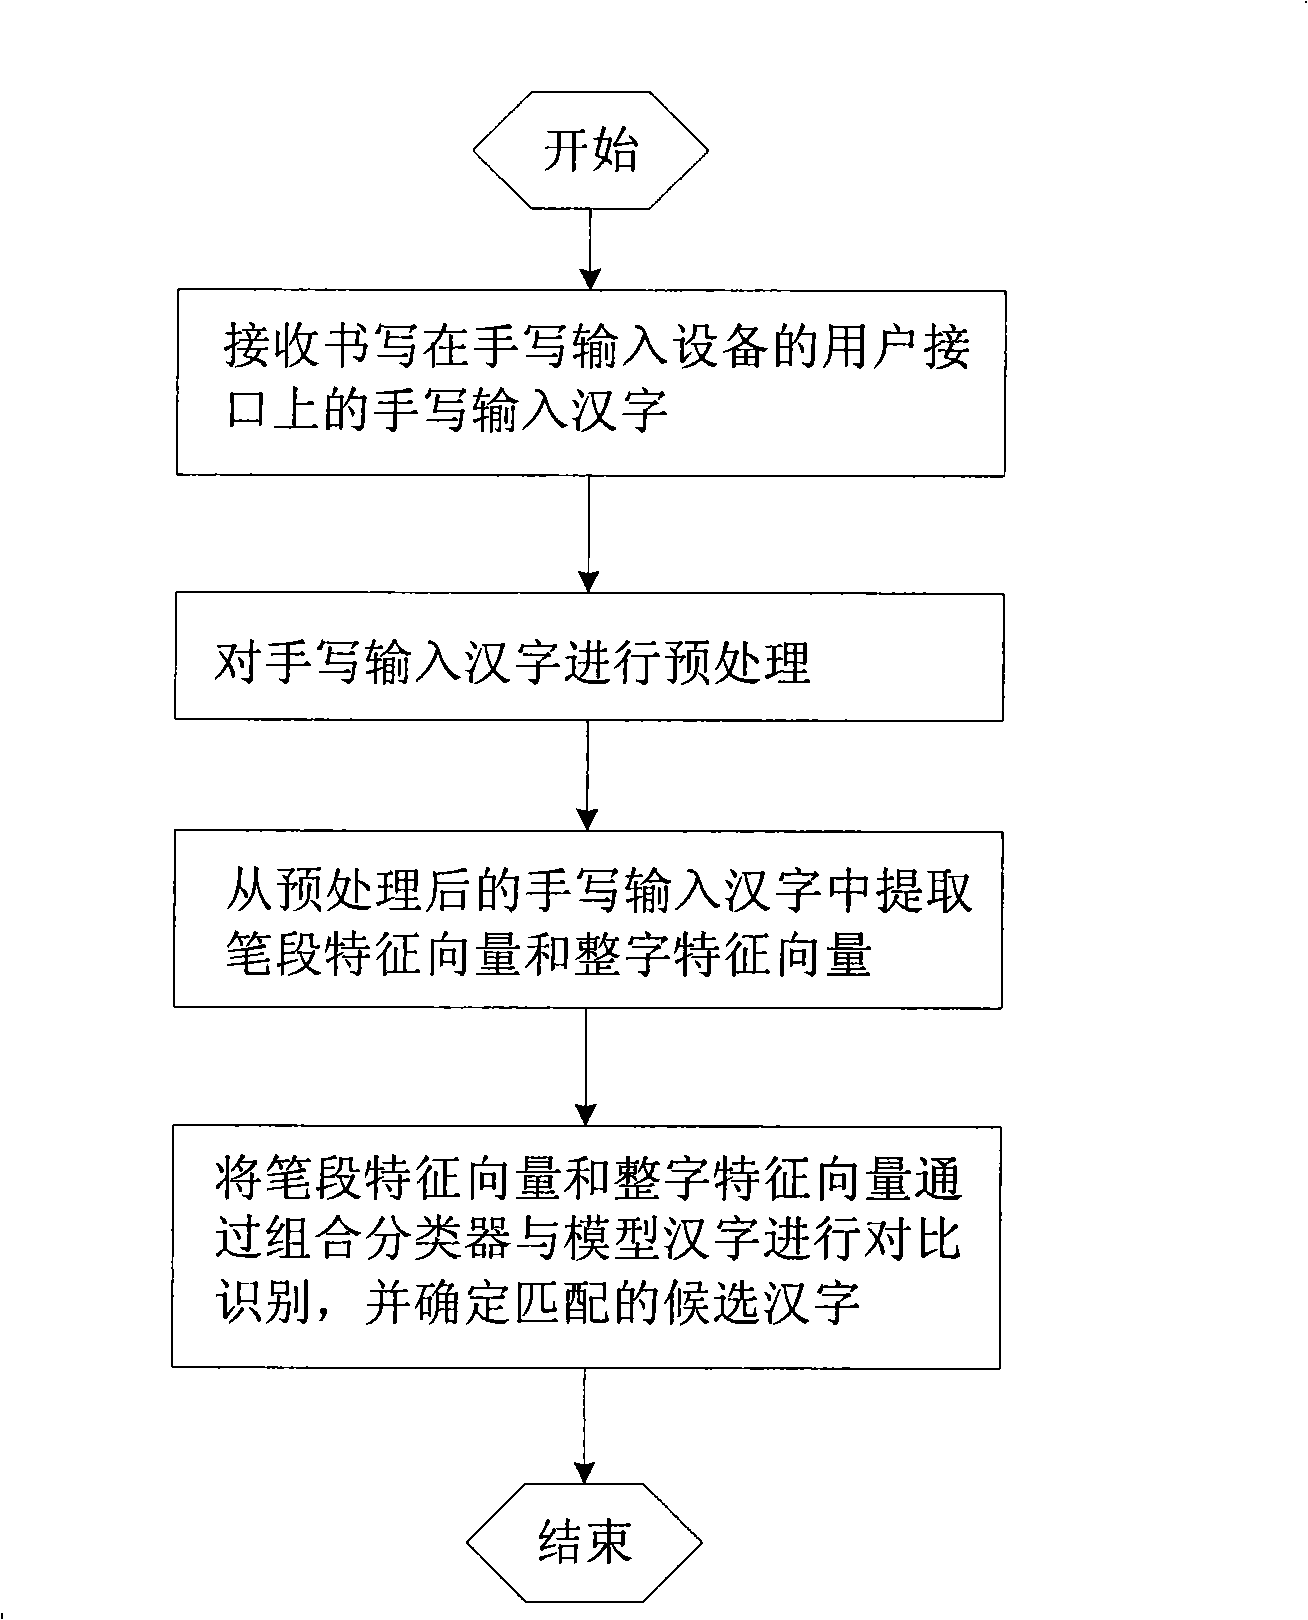 Hand-written recognition method based on assembled classifier